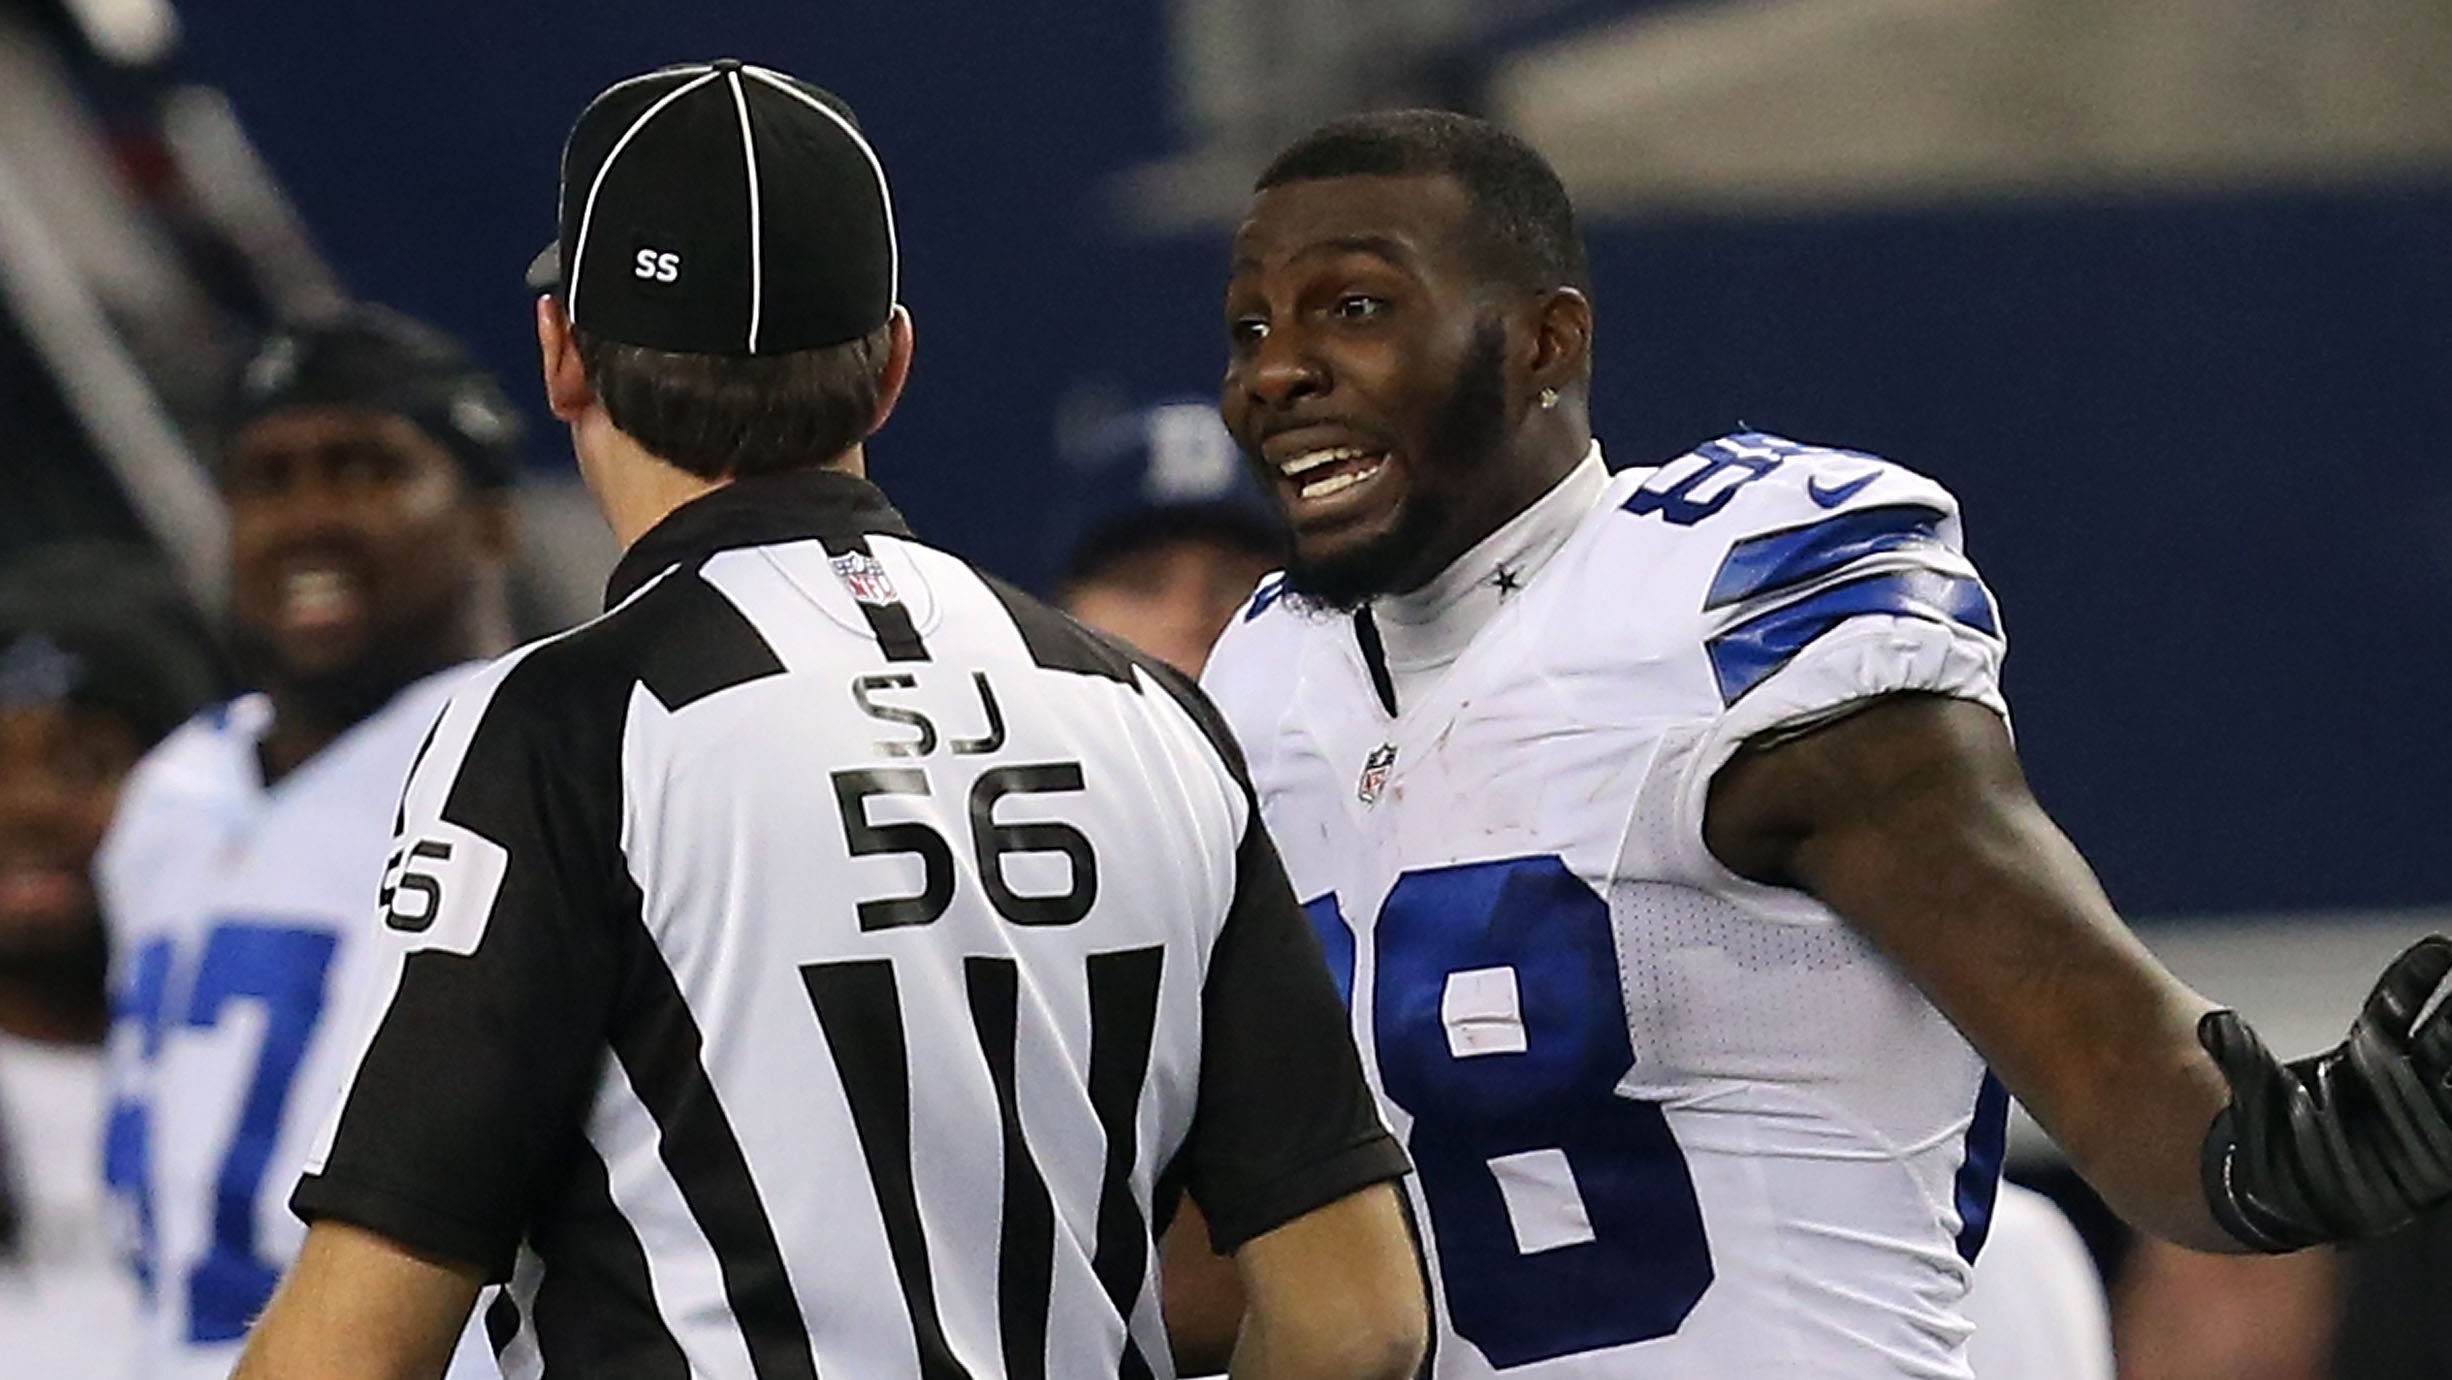 George: Dez Bryant disappears on the field and from the locker room